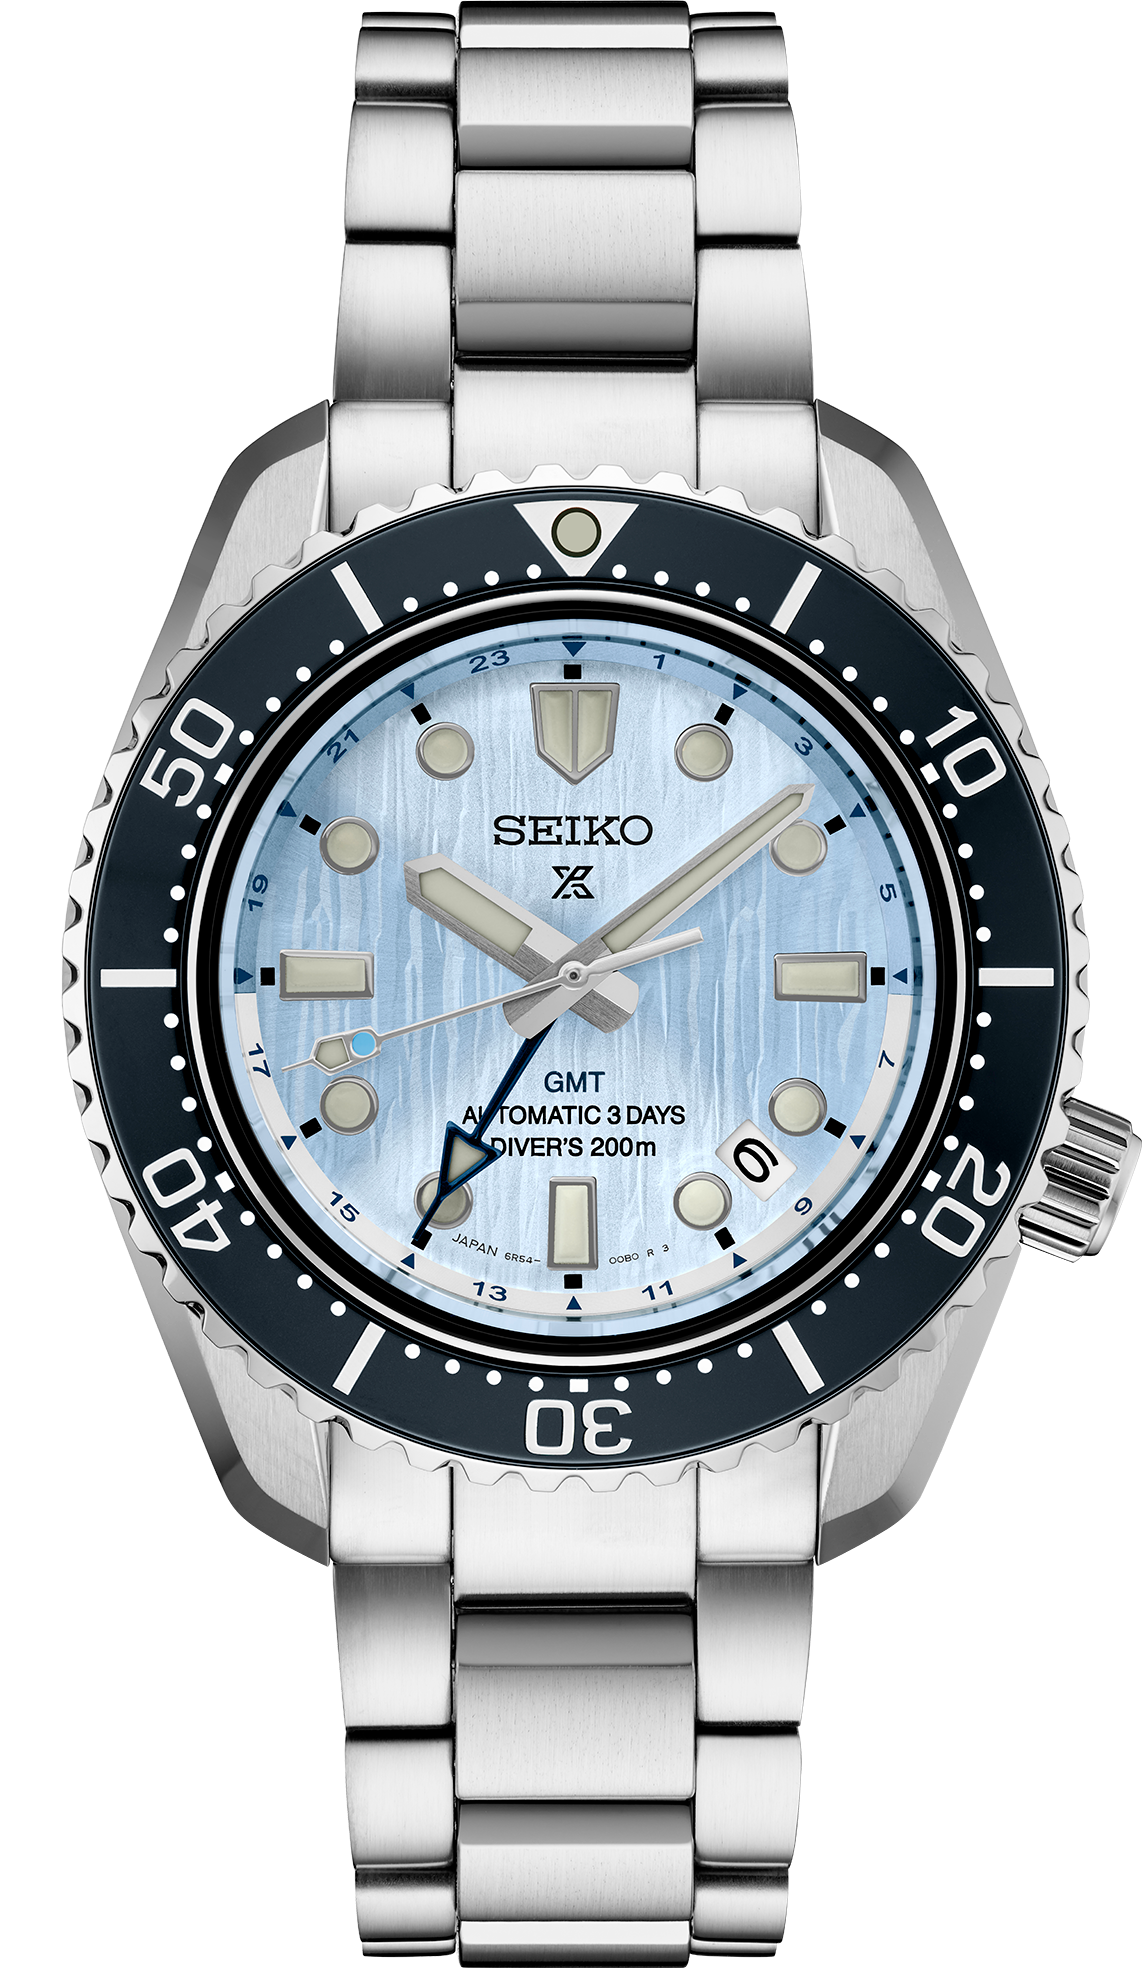 New Release: Seiko Prospex Land Mechanical GMT SPB411 Limited-Edition Watch